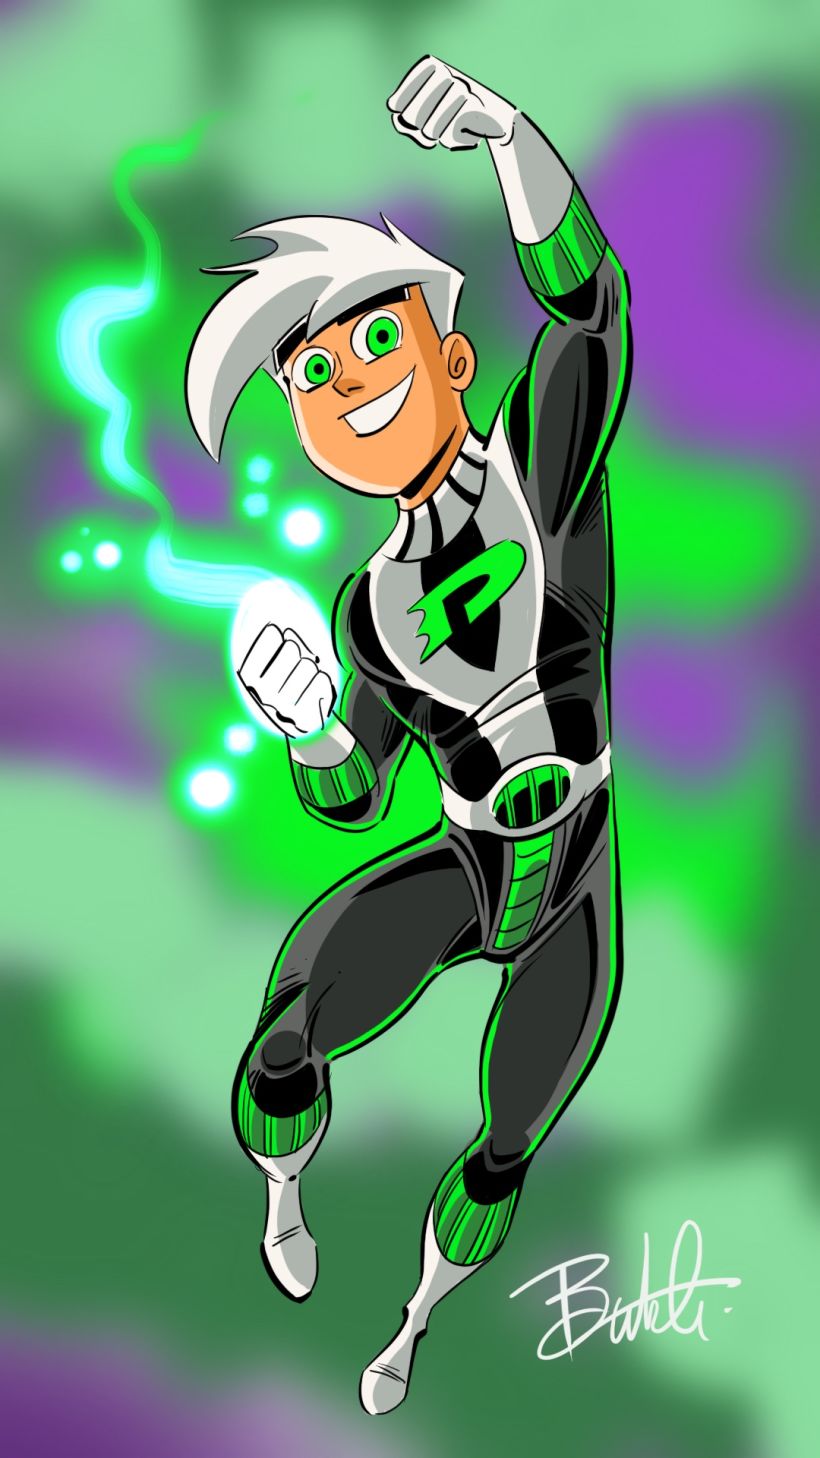 Danny Phantom this is my super suit art by me sorry for the lame title  XD  rAnimeART